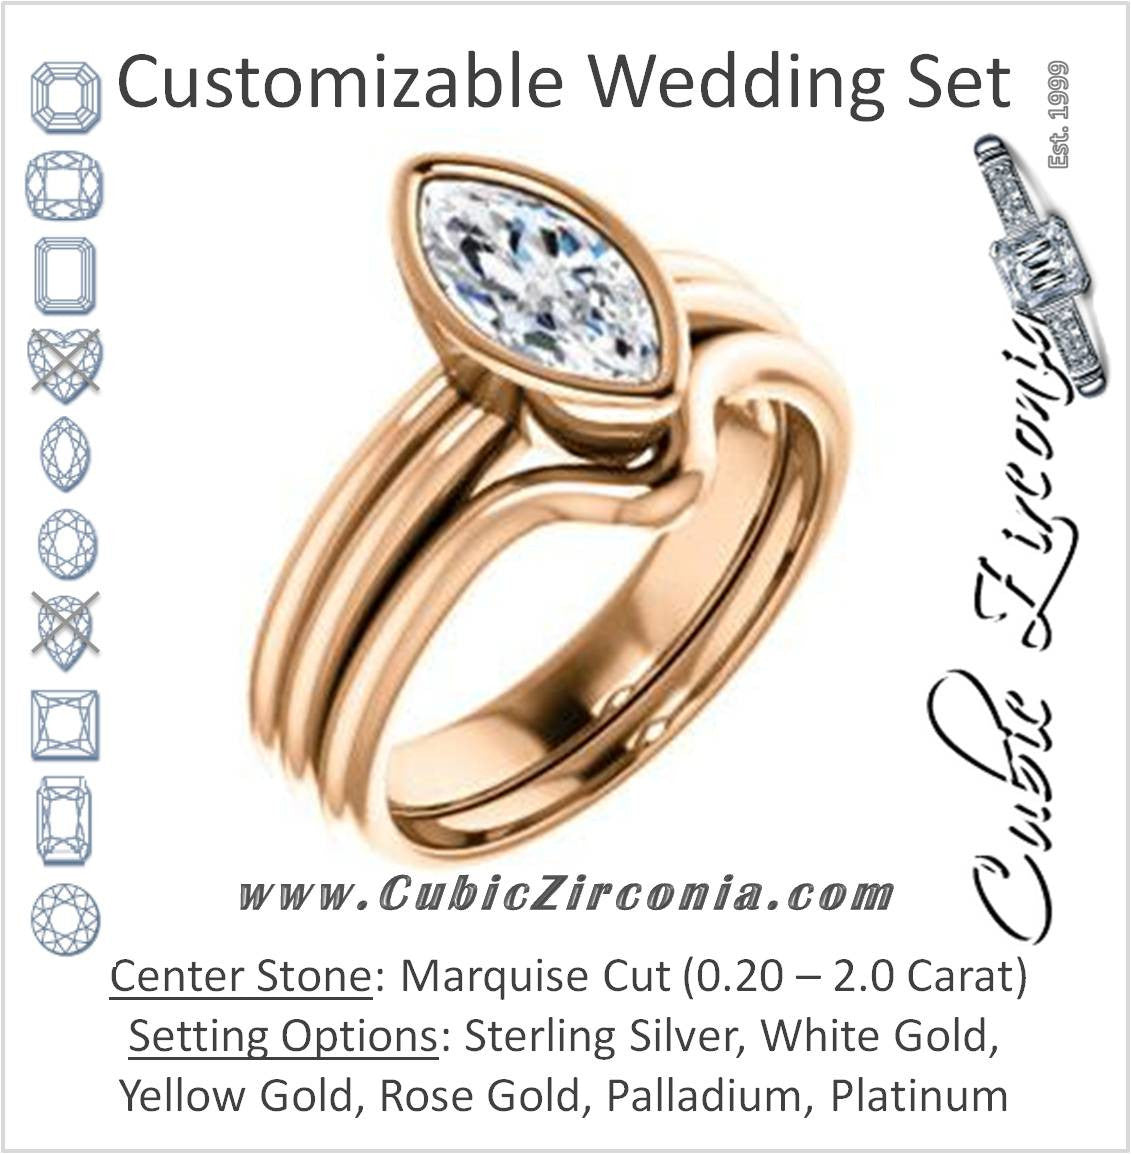 CZ Wedding Set, featuring The Stacie engagement ring (Customizable Bezel-set Marquise Cut Solitaire with Grooved Band)